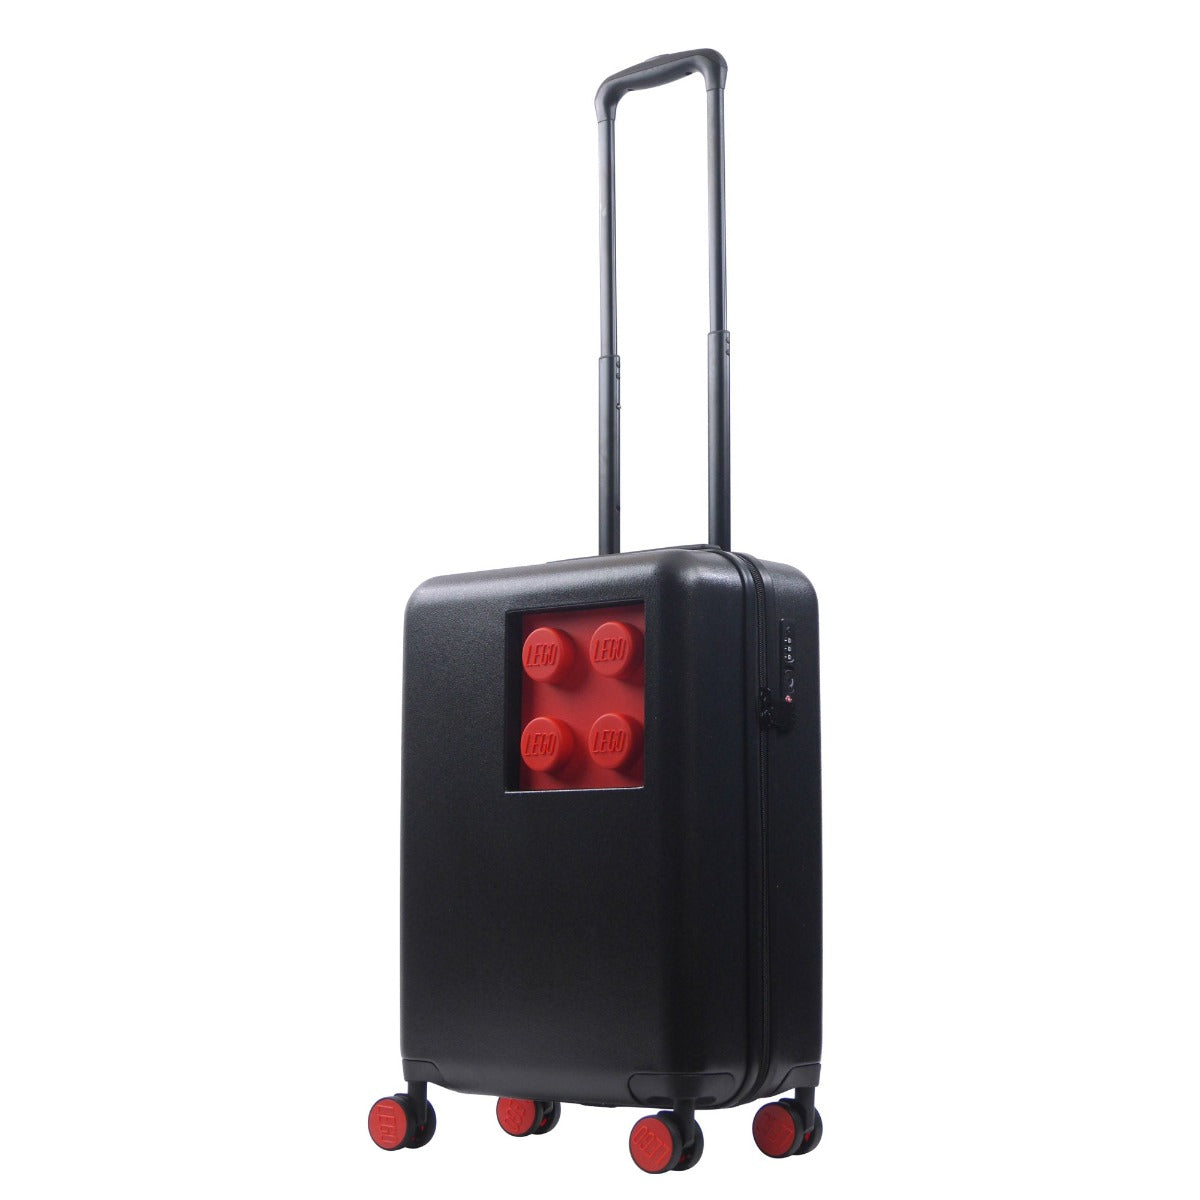 Lego Signature Brick 2X2 black red 21" carry-on rolling luggage spinner suitcase